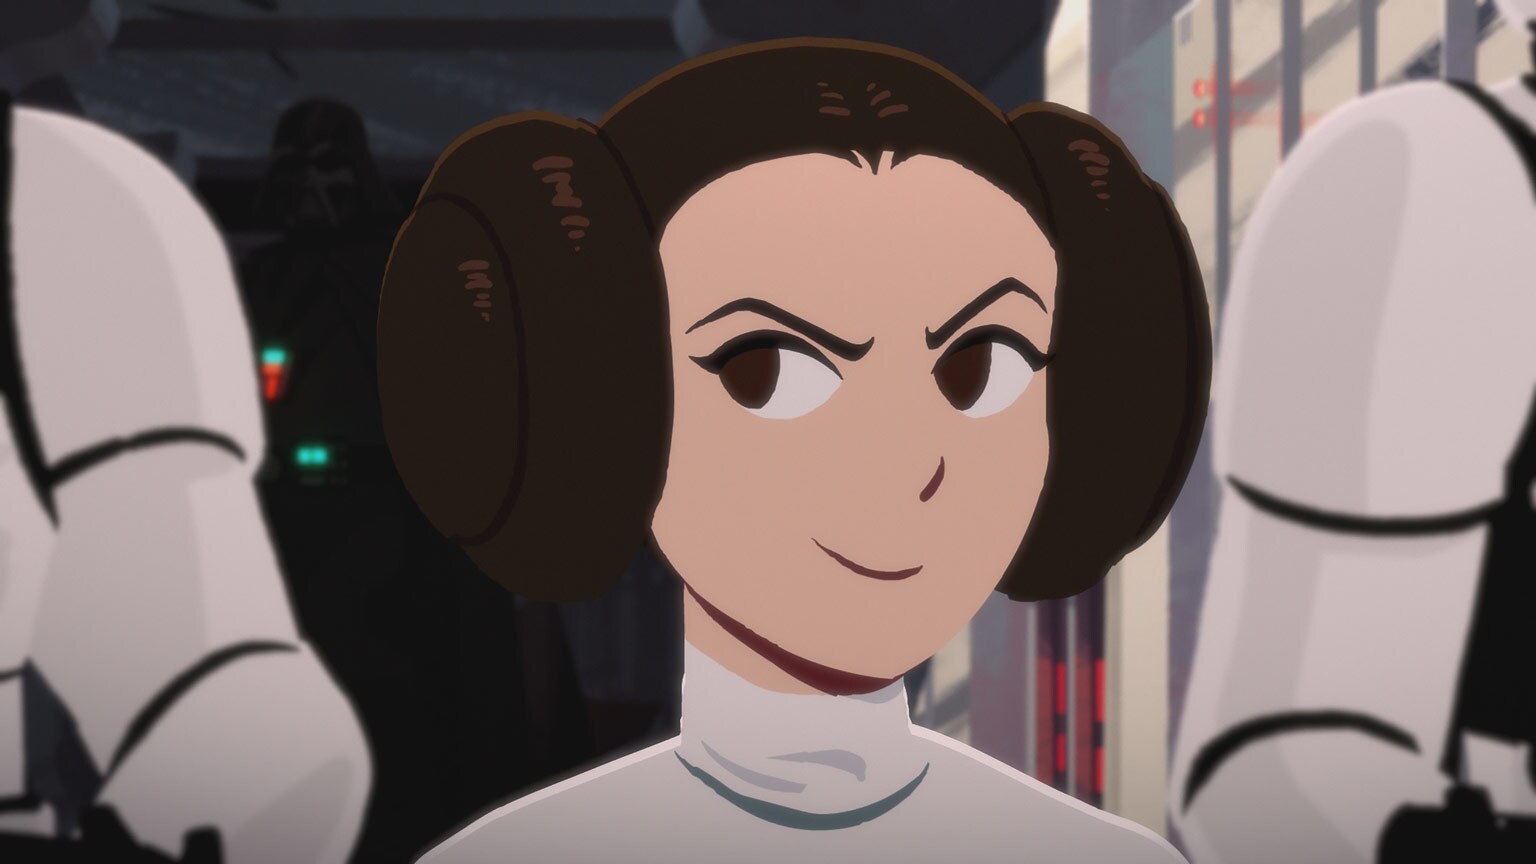 "The Timelessness of Leia": Producer Josh Rimes on the Newest Installments of Star Wars Galaxy of Adventures